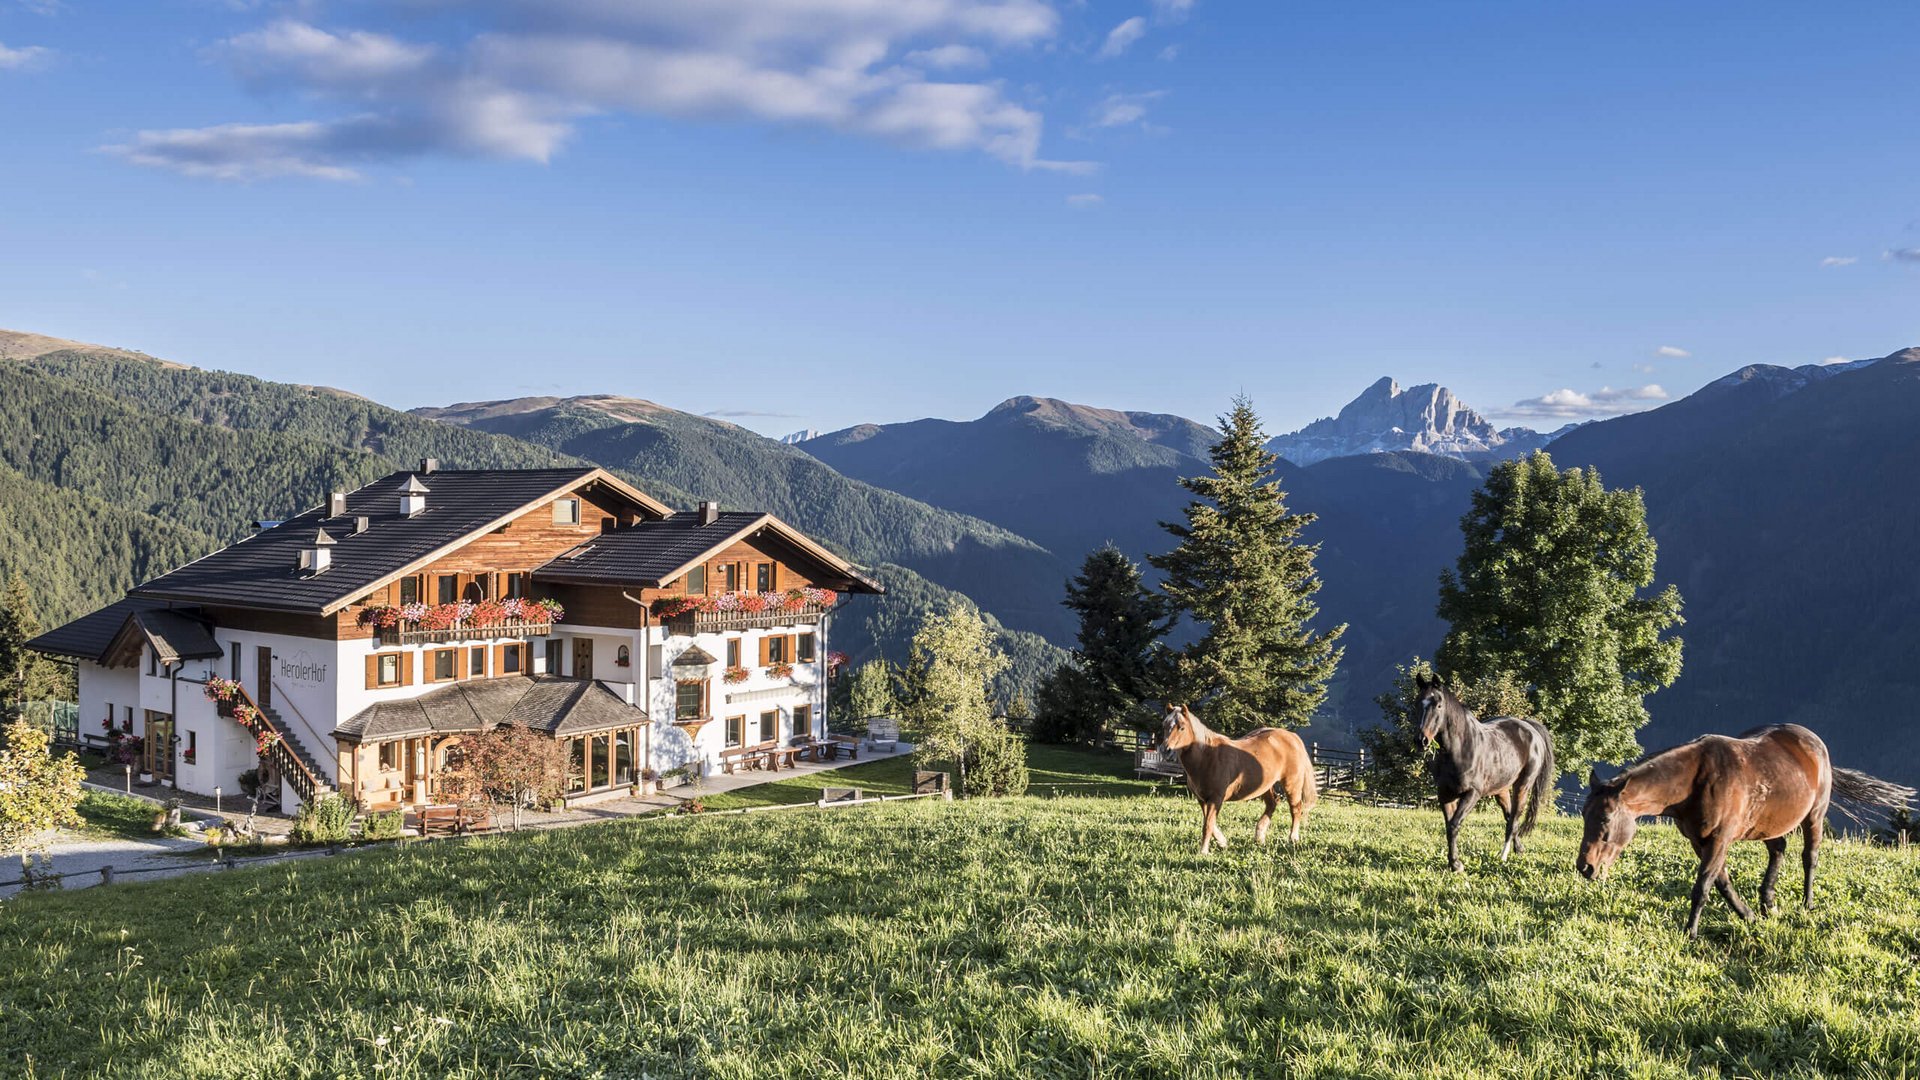 Holiday in nature: South Tyrol and what awaits you here